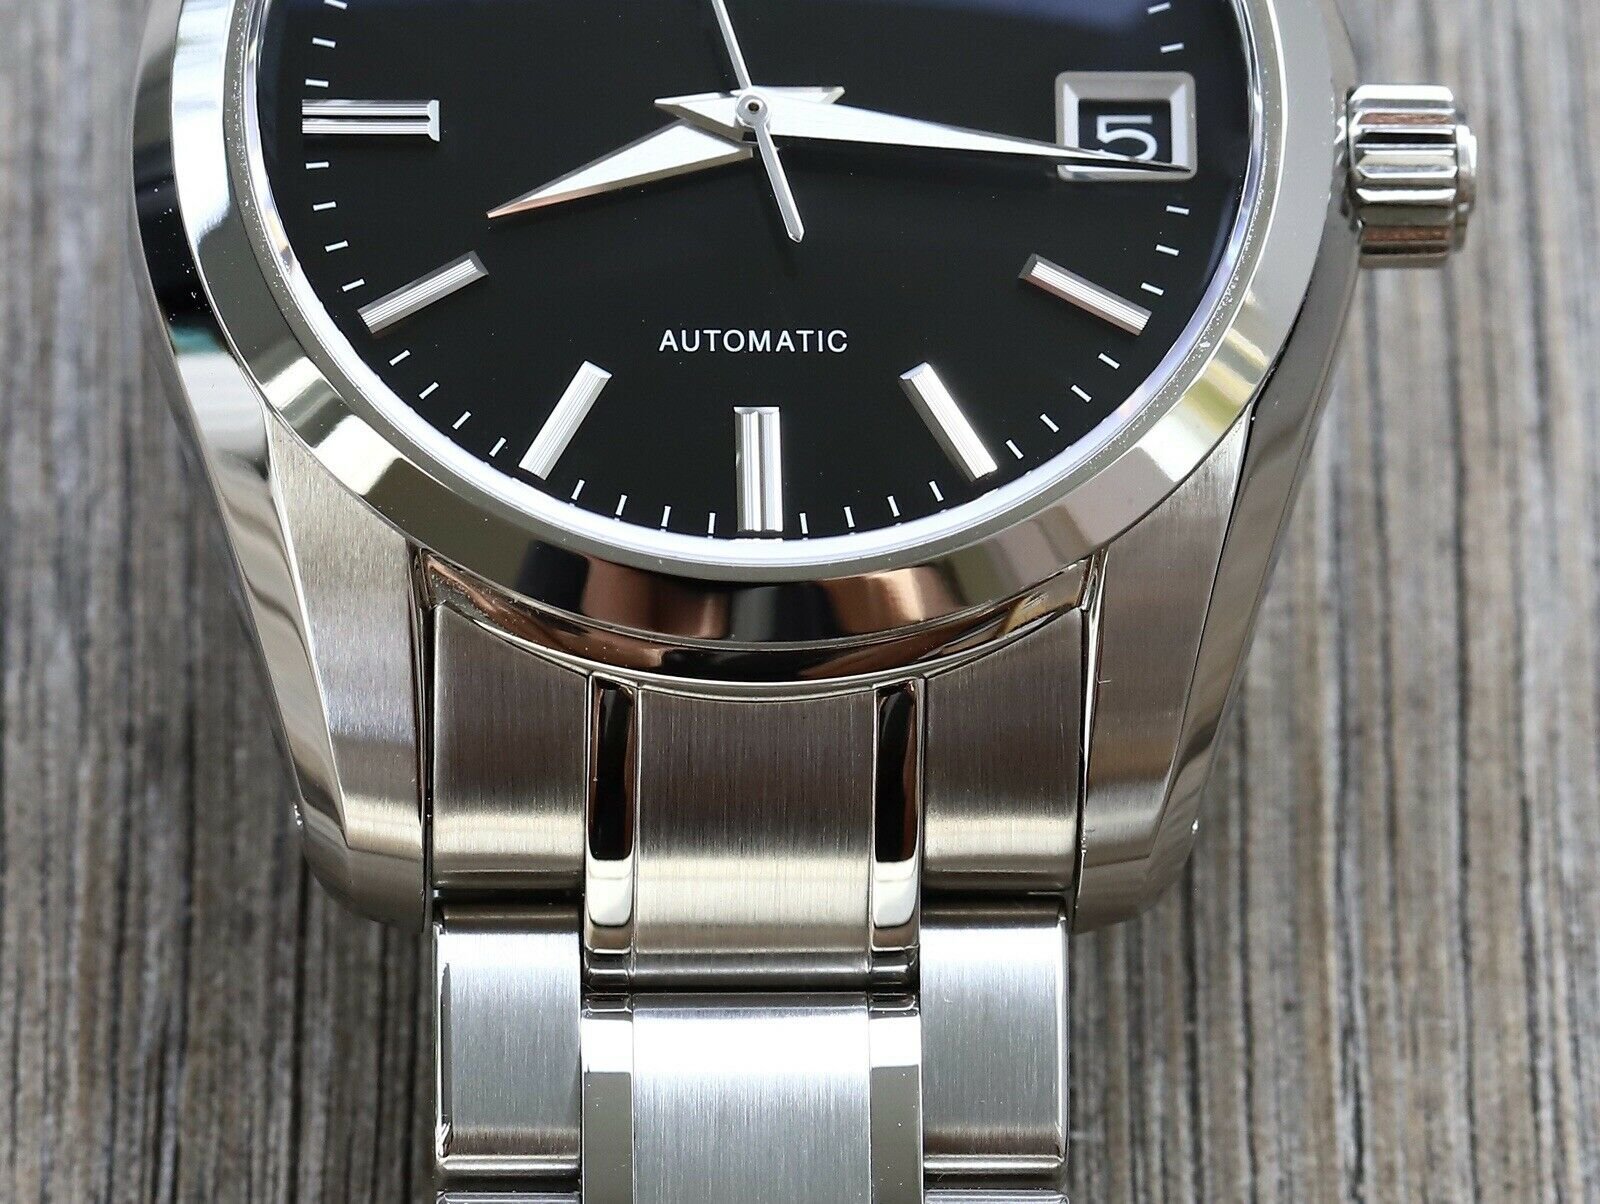 Grand Seiko Heritage Collection Automatic 37mm SBGR253 - 2020 — WATCH VAULT